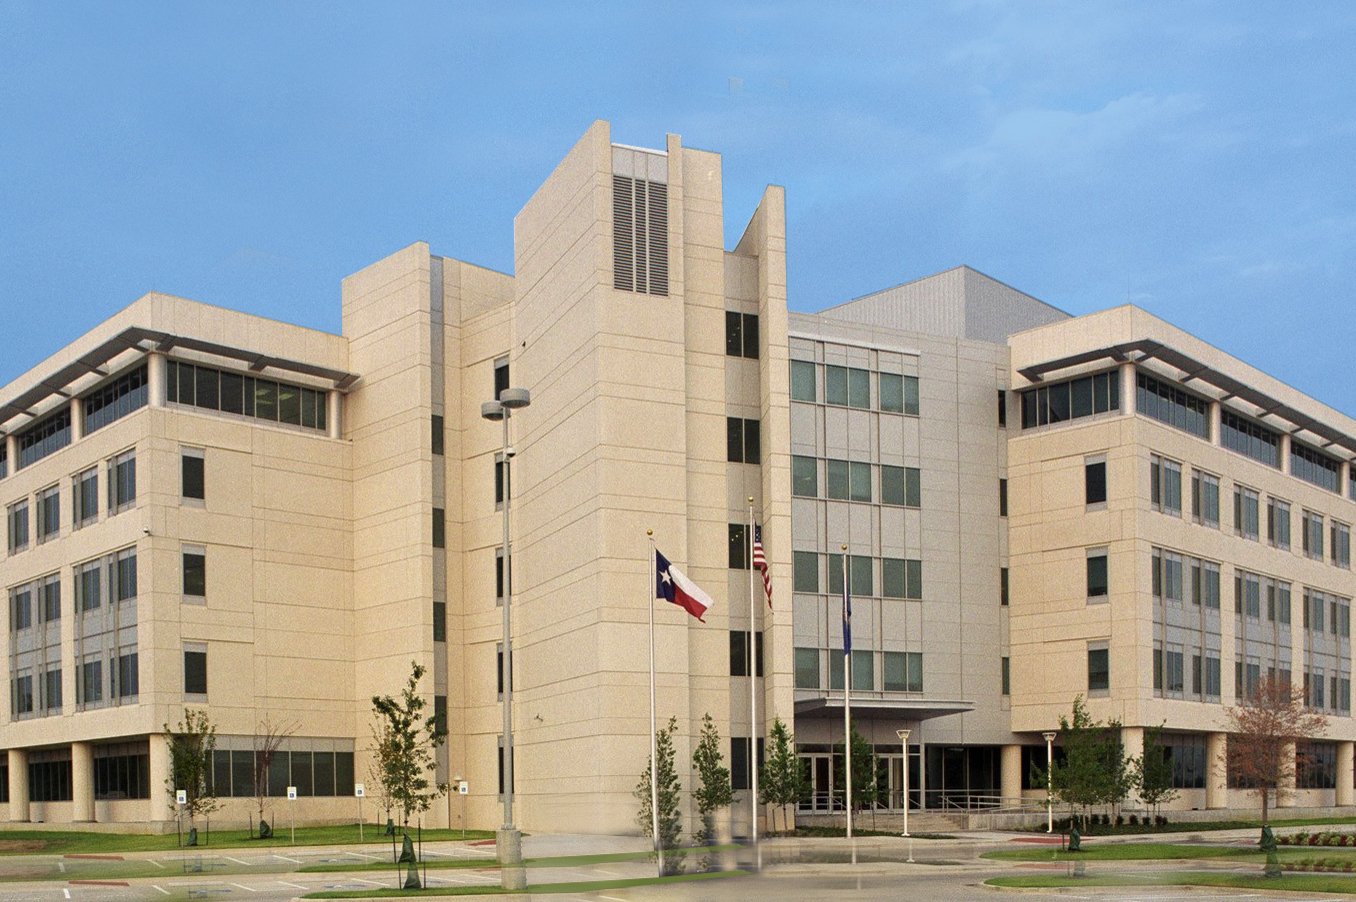 Dallas Field Office Building at One Justice Way